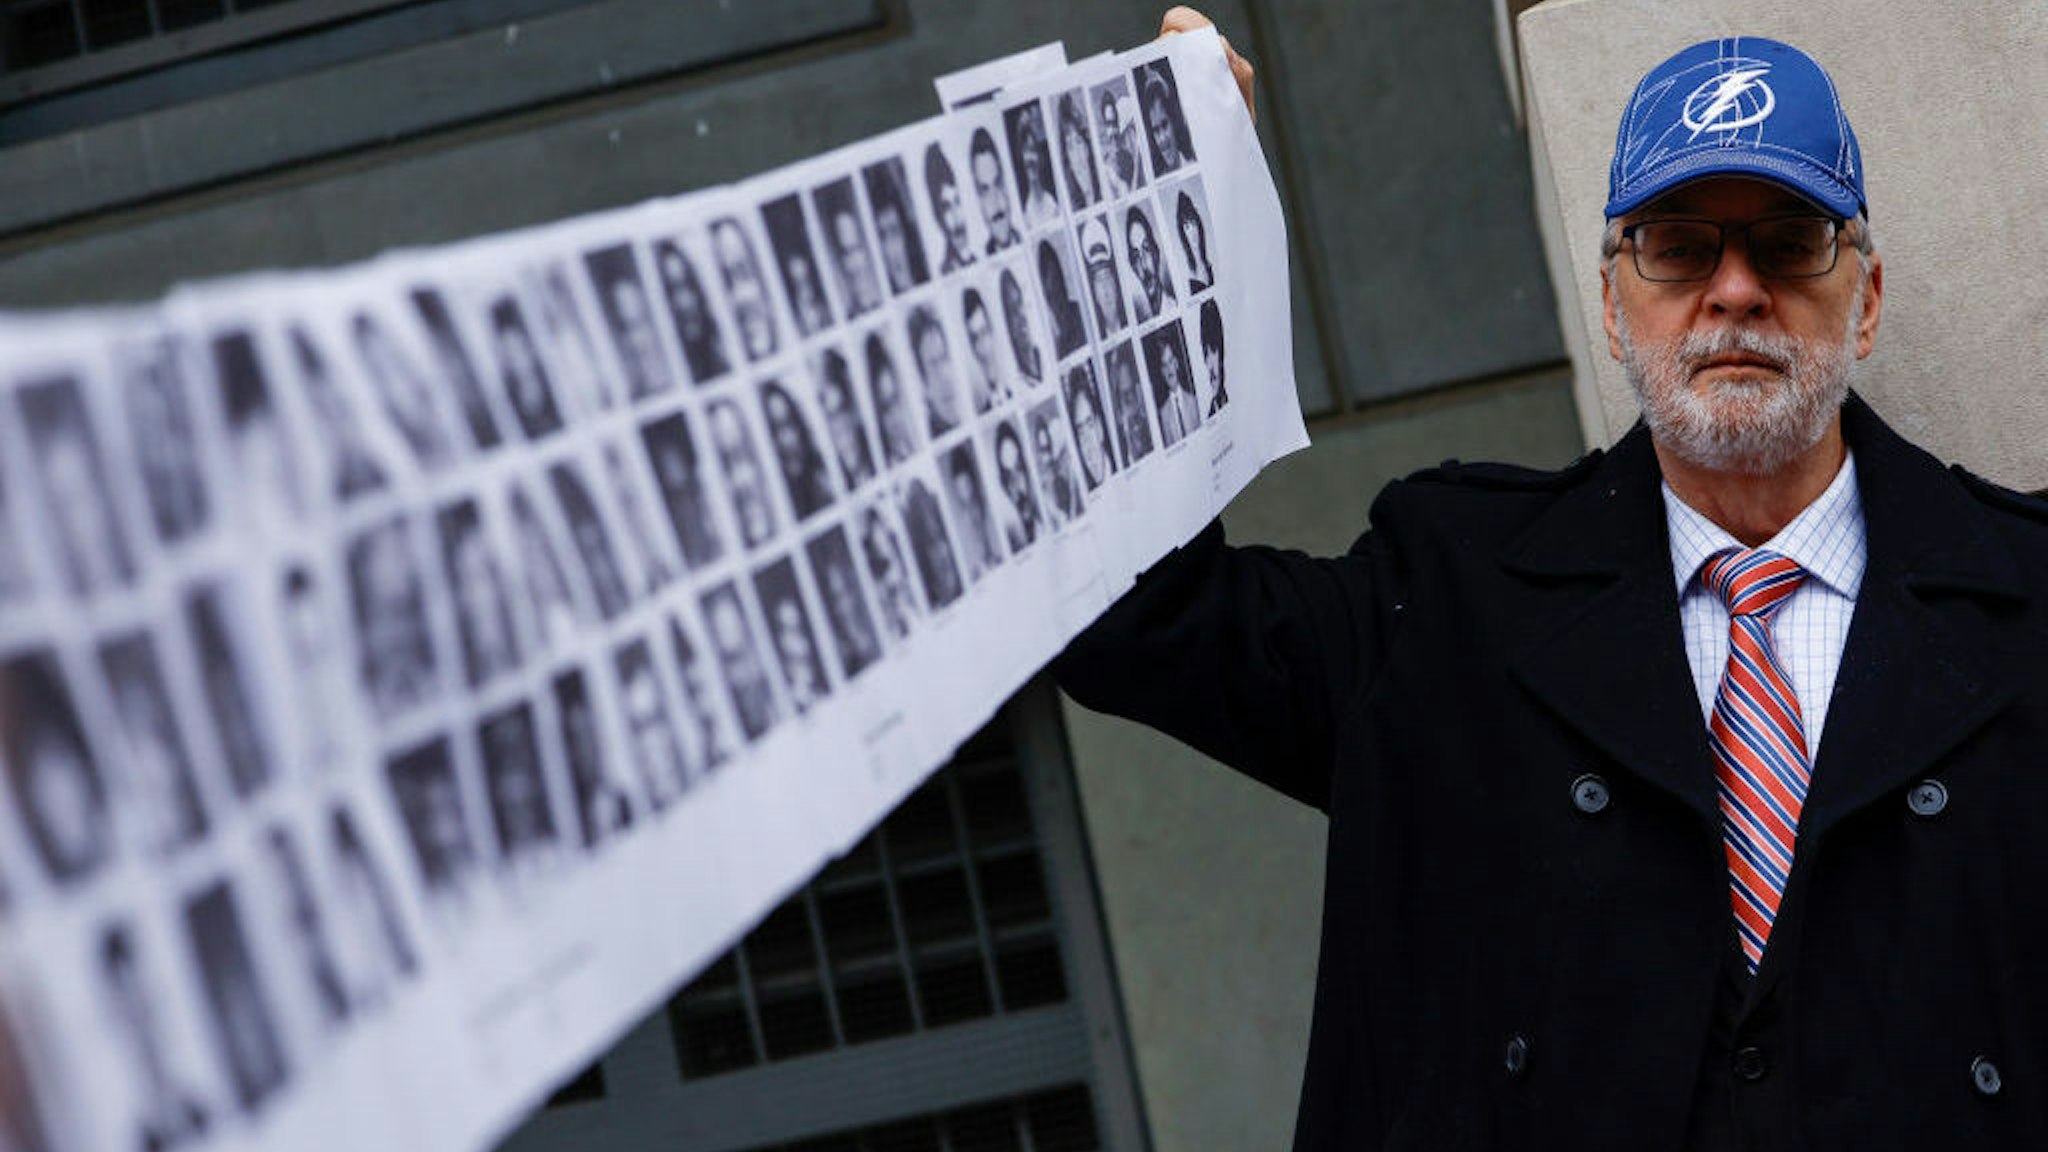 WASHINGTON, DC - DECEMBER 12: Paul Hudson, whose daughter Melina was one of the victims in the Pan Am Flight 103 Lockerbie bombing, holds up a banner of pictures of additional victims outside the federal court before the trial for a Libyan man accused of making the bomb that exploded the plane on December 12, 2022 in Washington, DC. U.S. officials announced that they had arrested Abu Agila Mohammad Mas’ud Kheir Al-Marimi for his involvement in the bombing that killed 270 people in December 1988. (Photo by Anna Moneymaker/Getty Images)